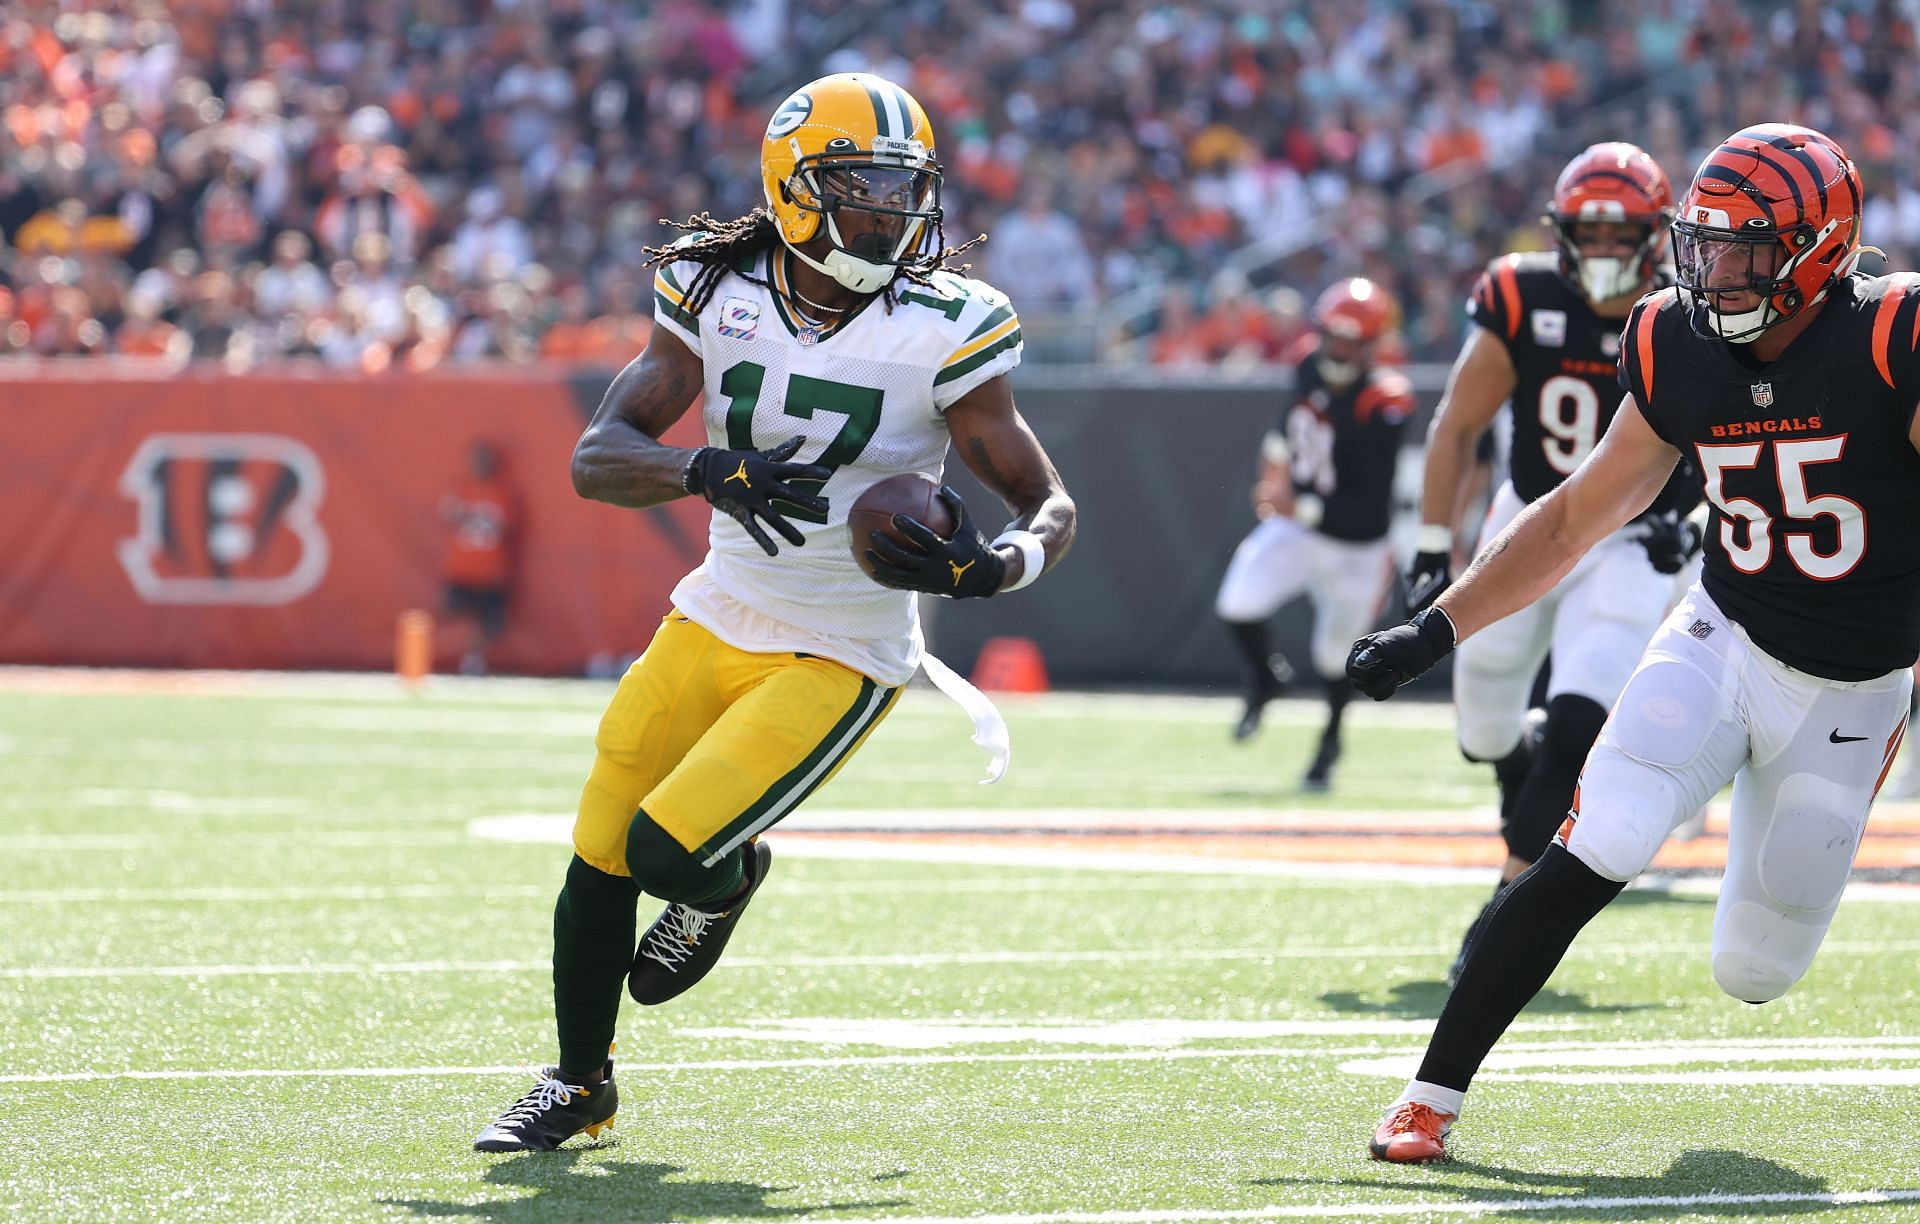 With help, Davante Adams could be even more dangerous